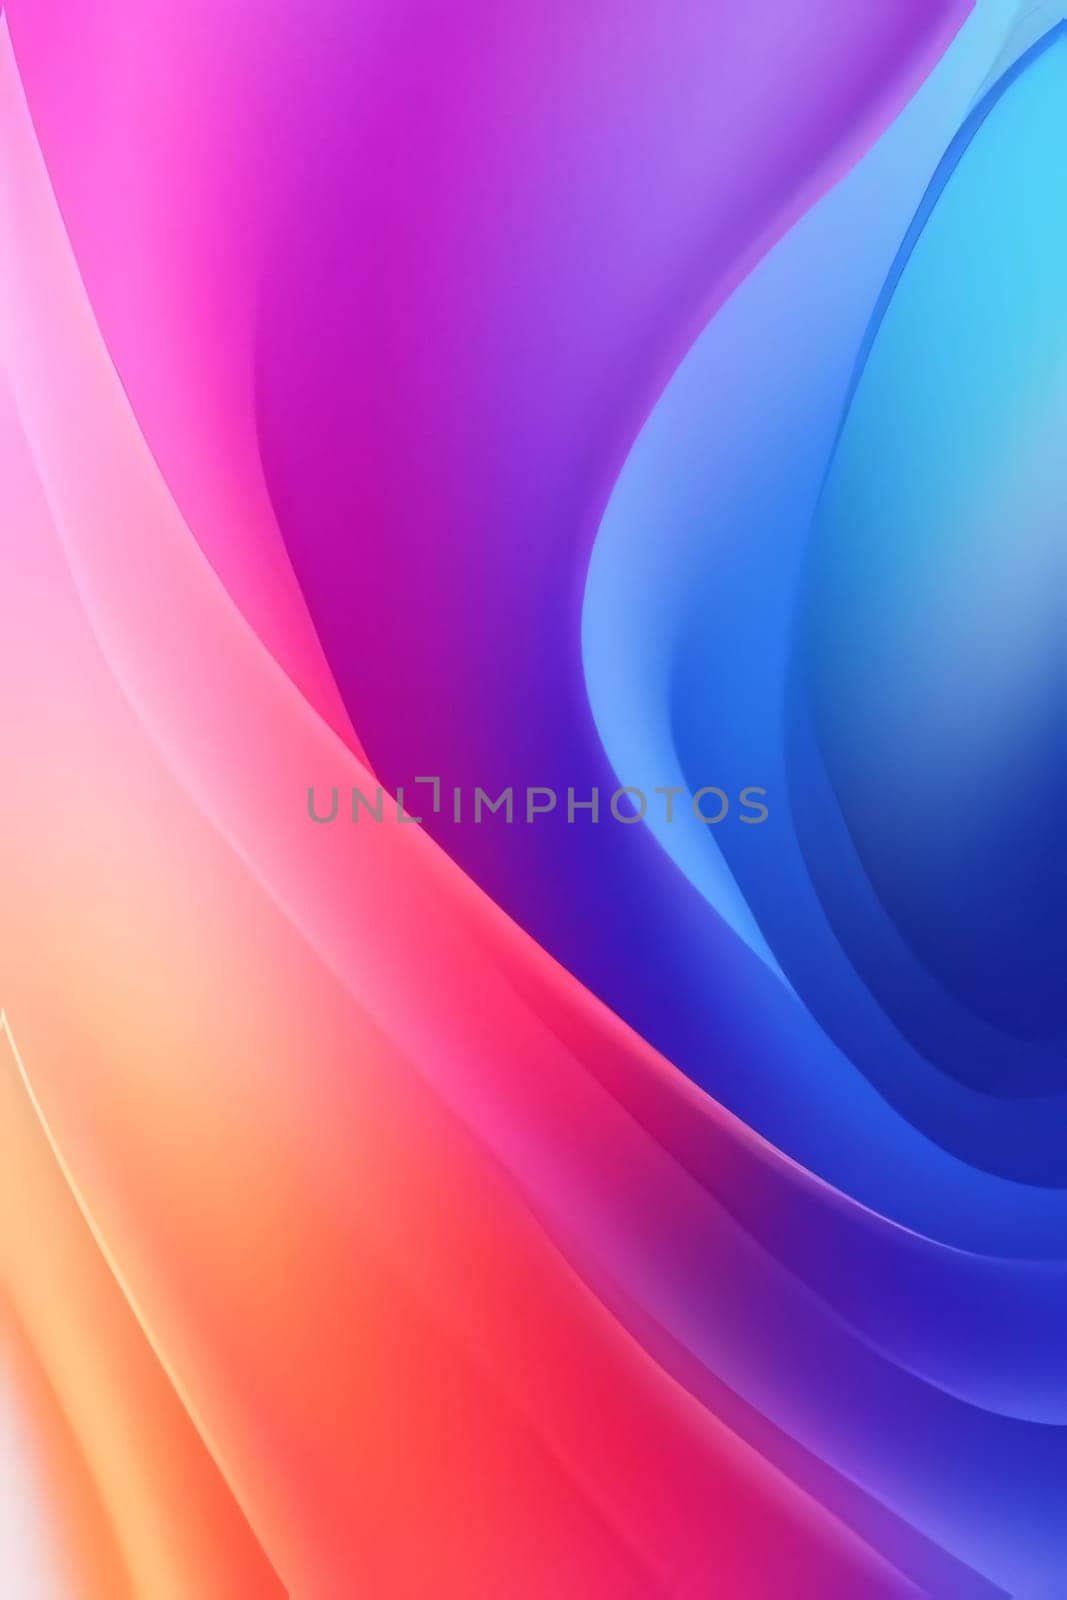 abstract background with smooth lines in blue, orange and pink colors by ThemesS